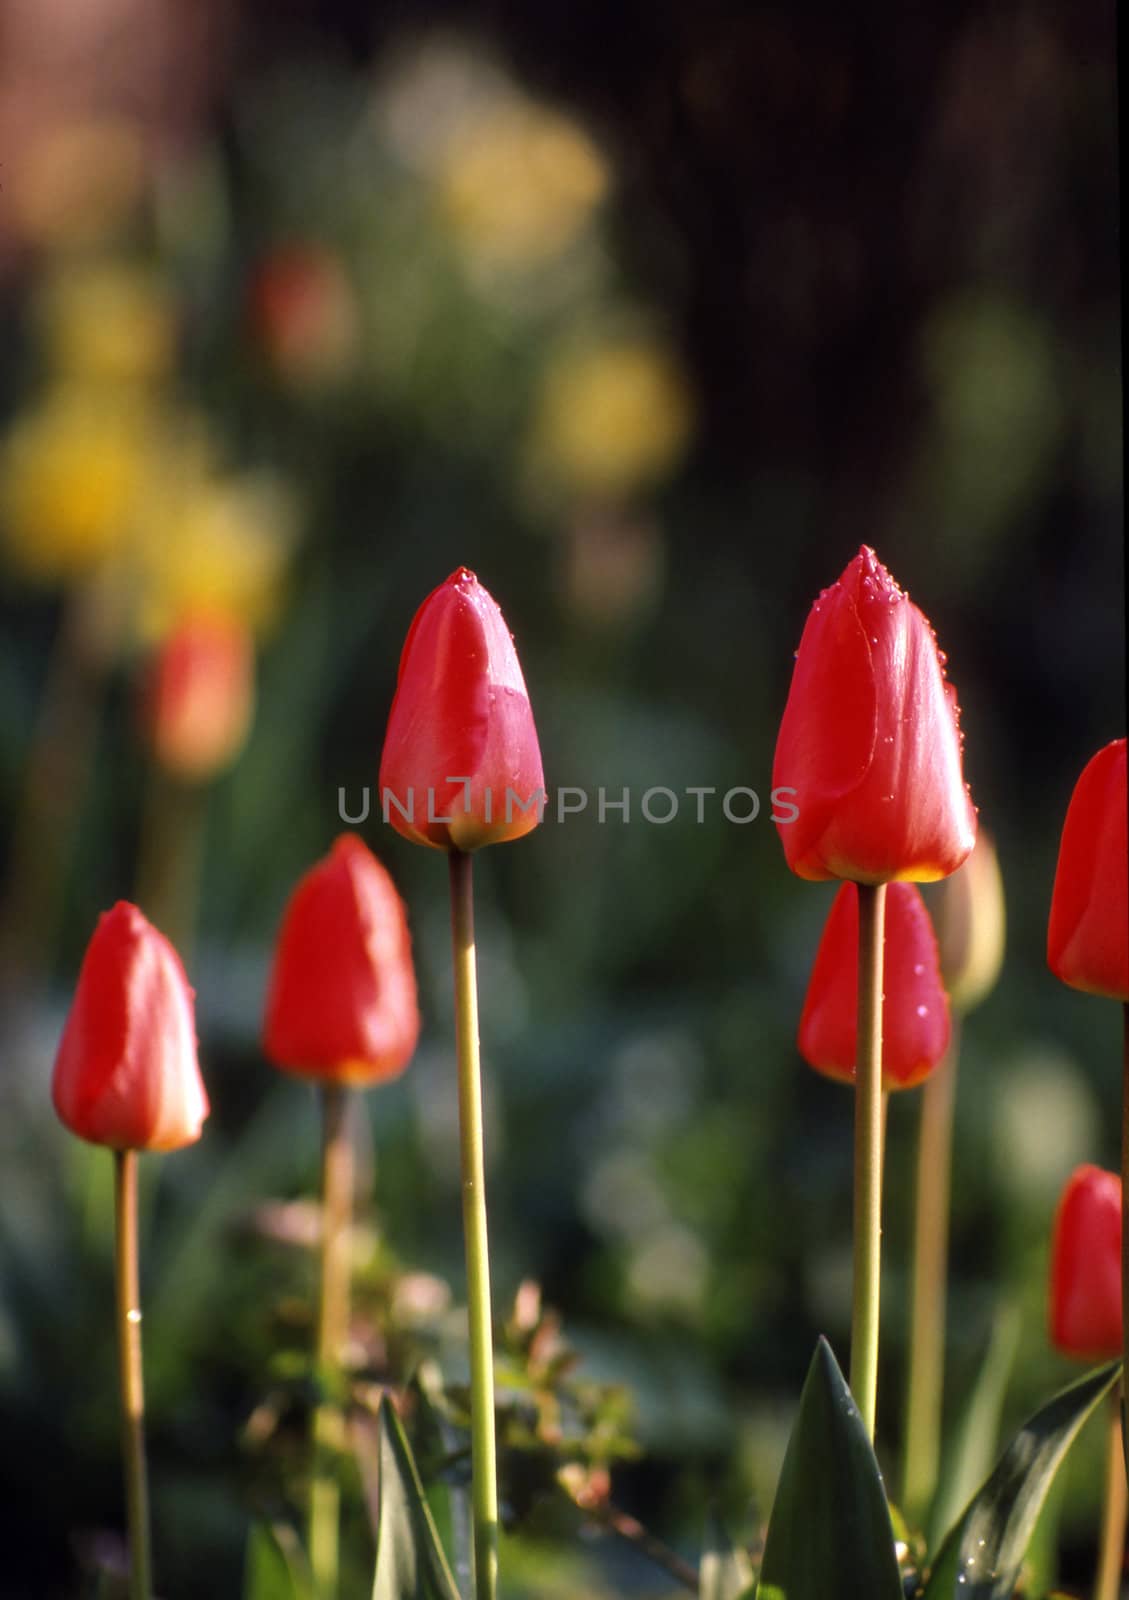 Red tulips early morning with morning dew on petals